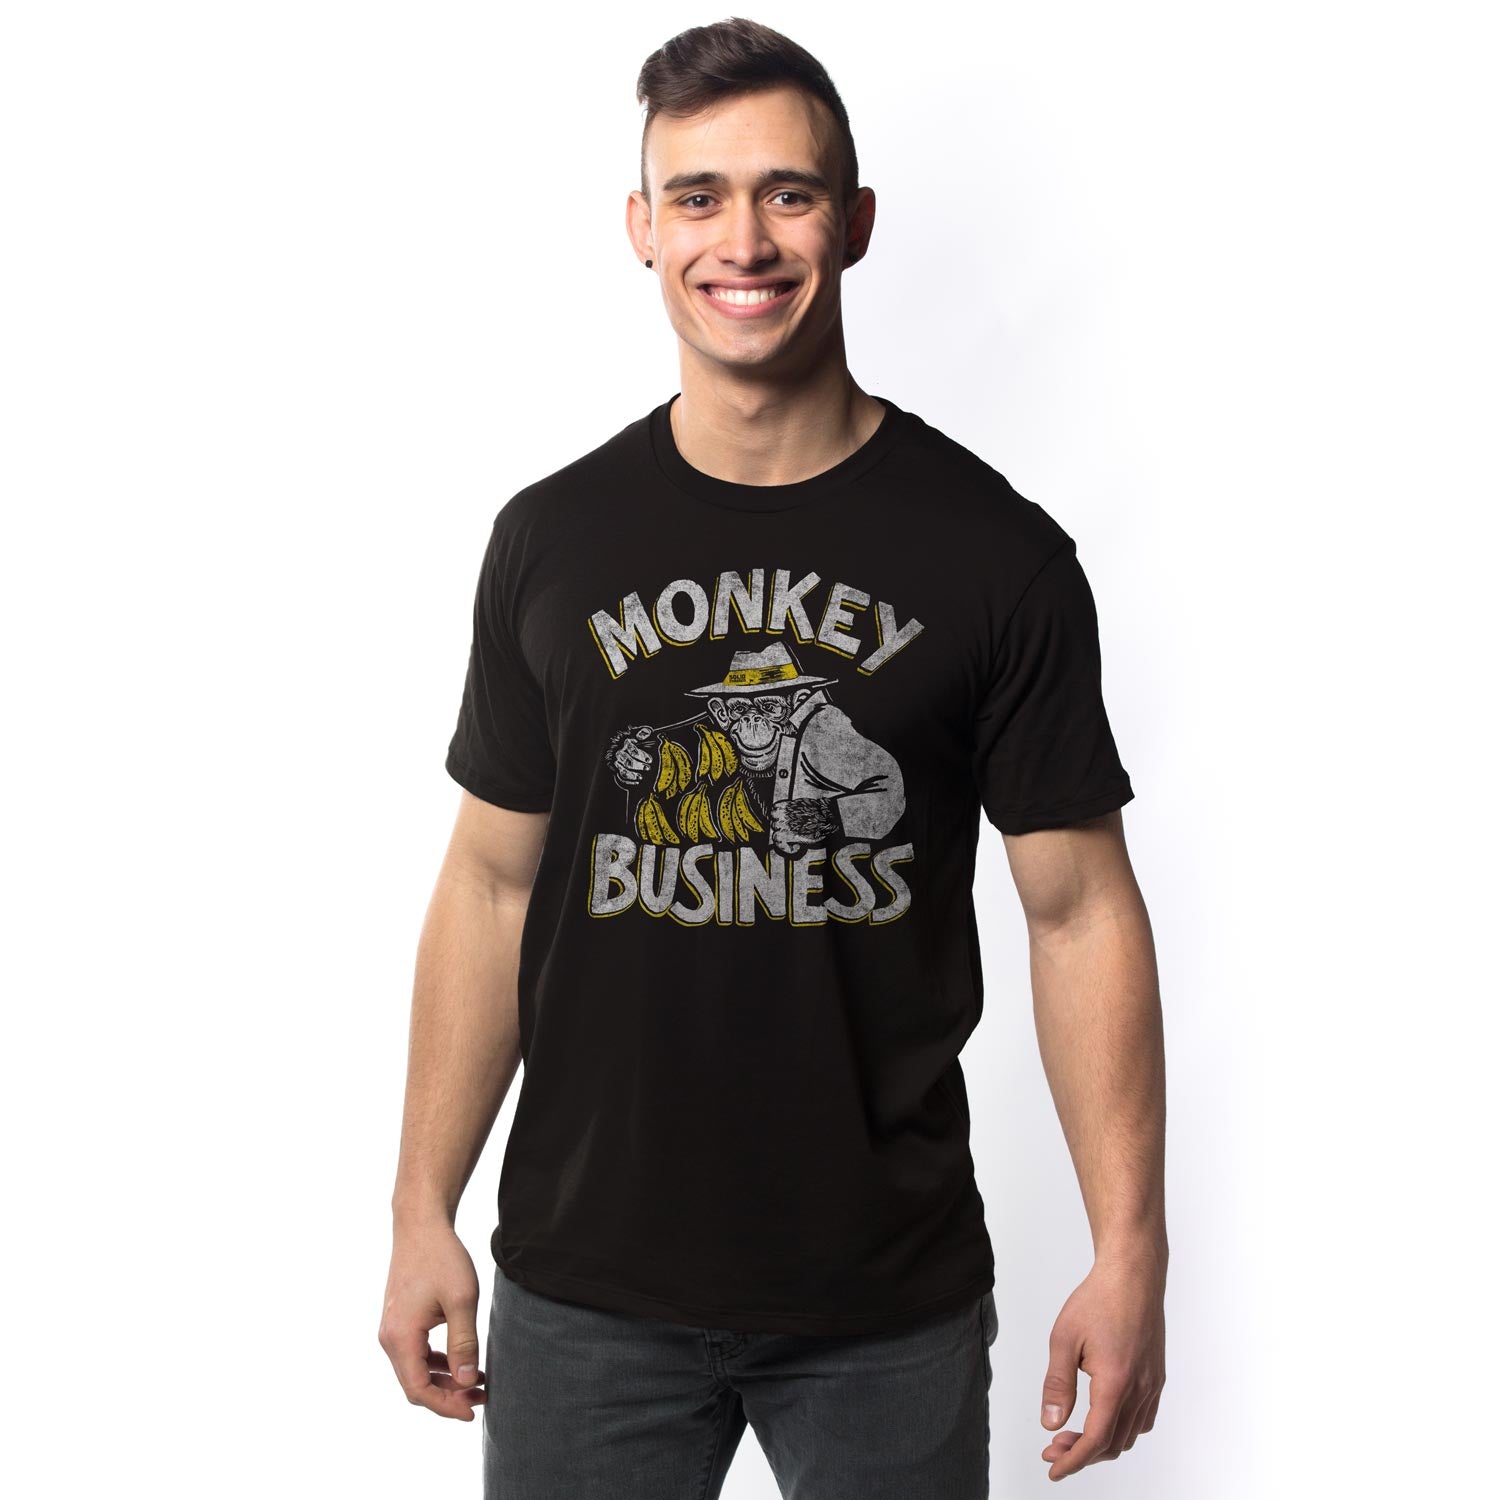 Monkey Business Vintage Inspired T-shirt | Funny Animal Graphic